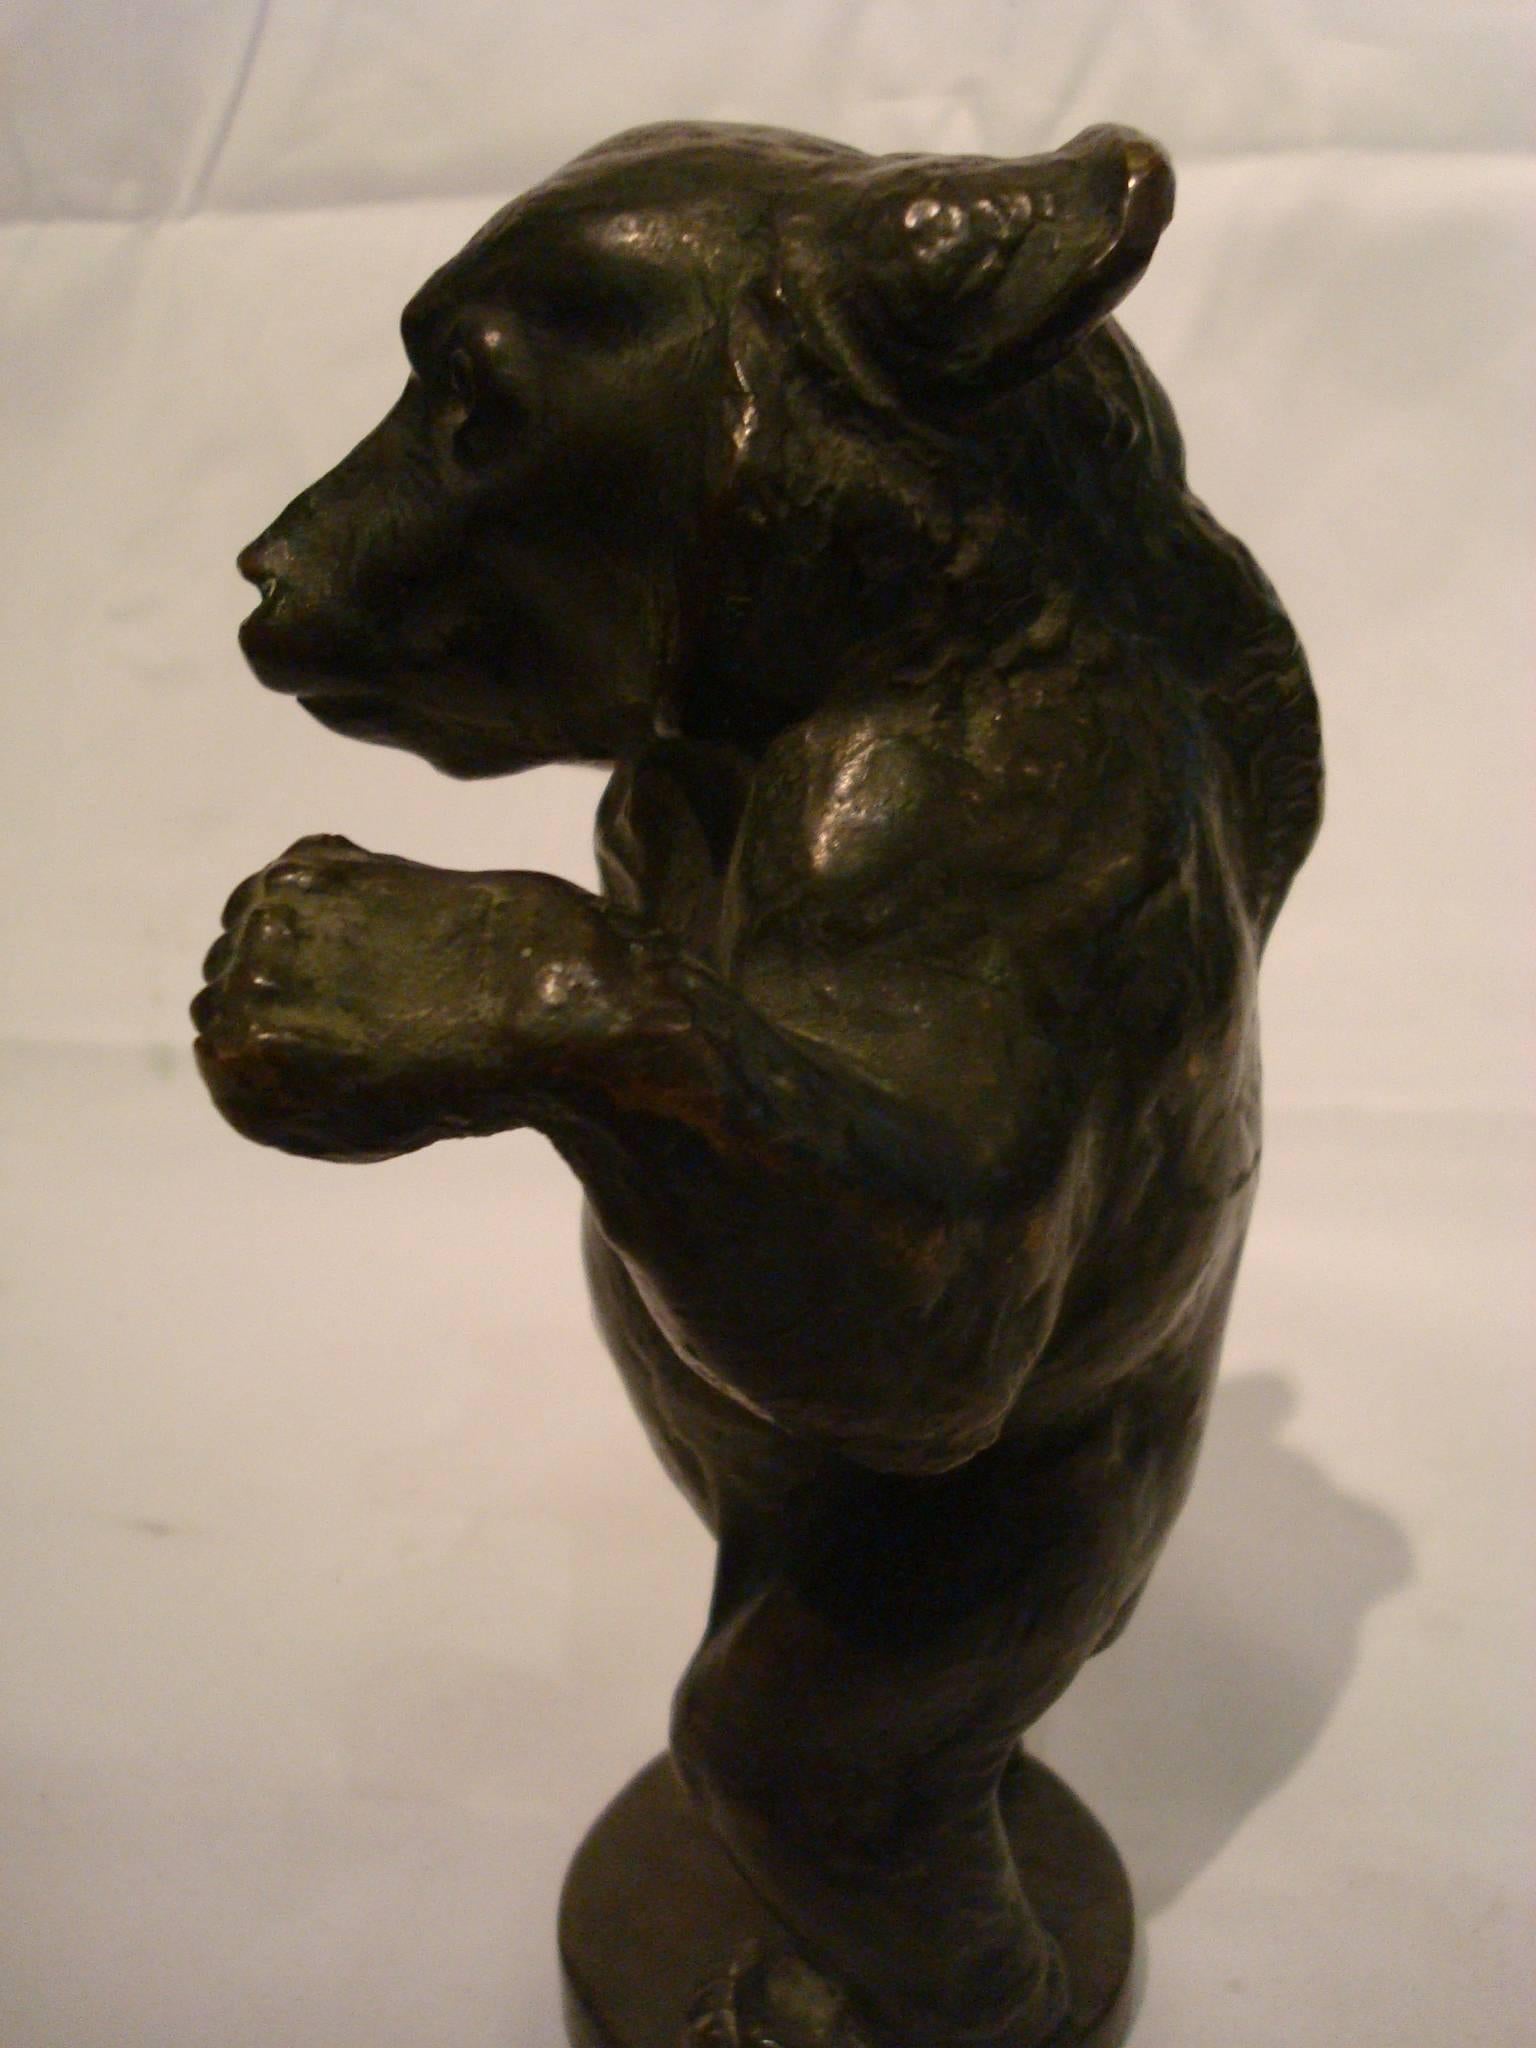 Young bear bronze figure. Probably paperweight or car mascot - hood ornament. Very nice details. Very good foundry quality, with original brown patina.